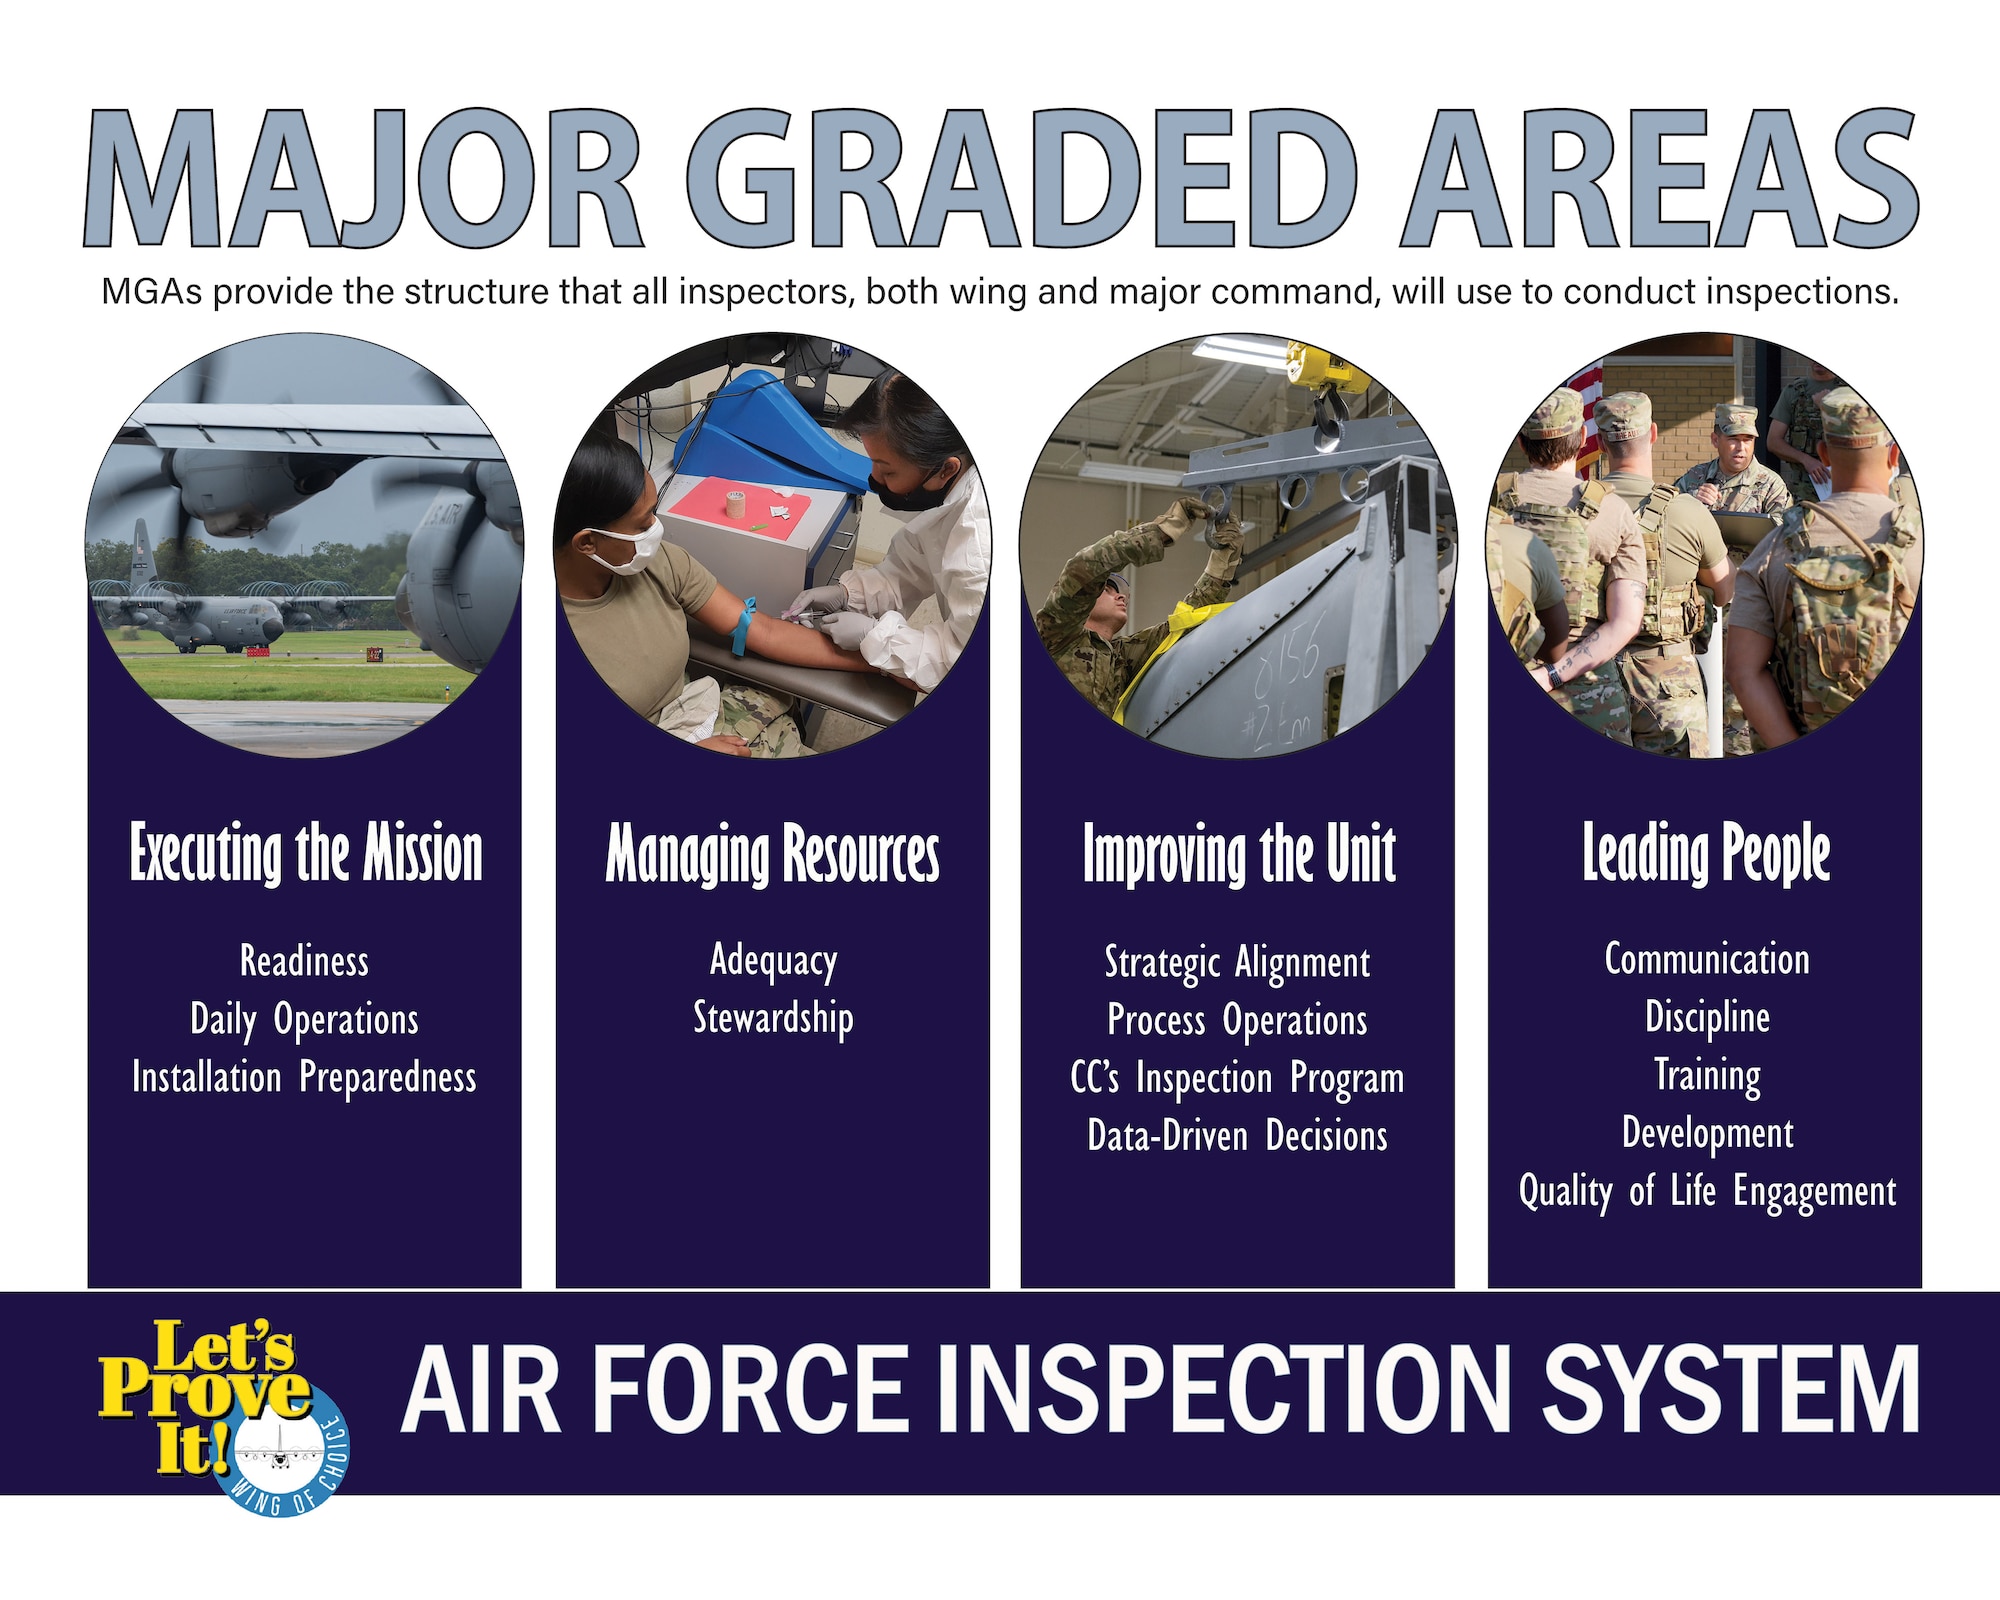 Major Graded Areas. MGAs provide the structure that all inpsectors, both wing and major command, will use to conduct inspections. Executing the mission: readiness, daily operations, installation preparedness. Managing resources: adequacy, stewardship. Improving the unit: strategic alignment, process operations, cc's inspection program, data driven decisions. Leading people: Communication, discipline, training, development, quality of life engagement. Let's Prove It. Air Force Inspection System